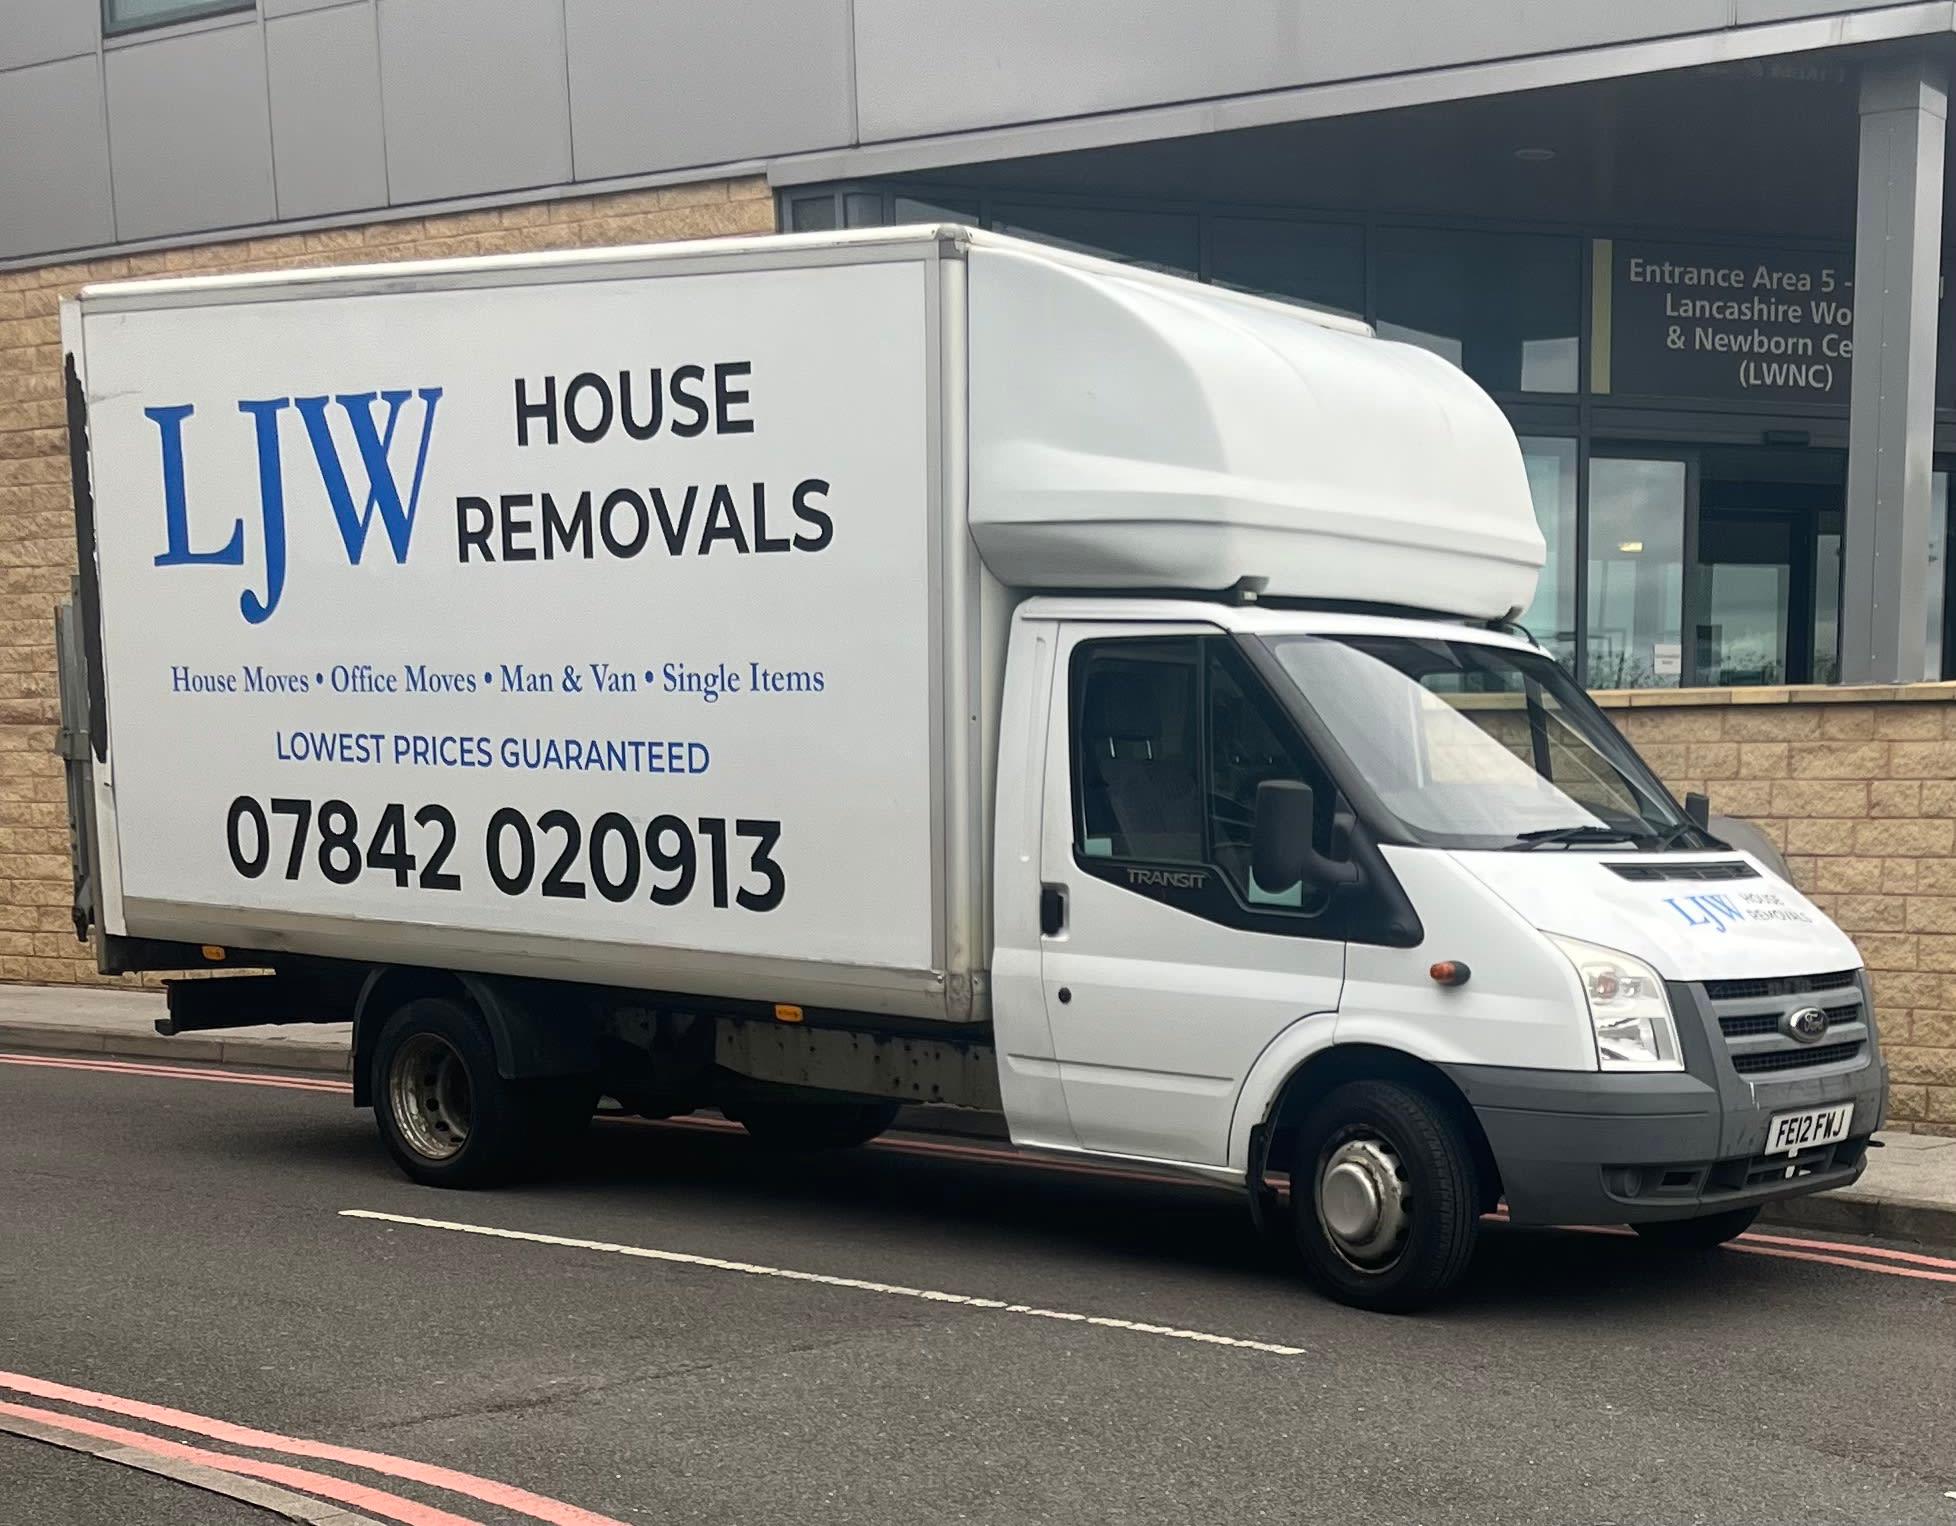 Images LJW House Clearance & Removals